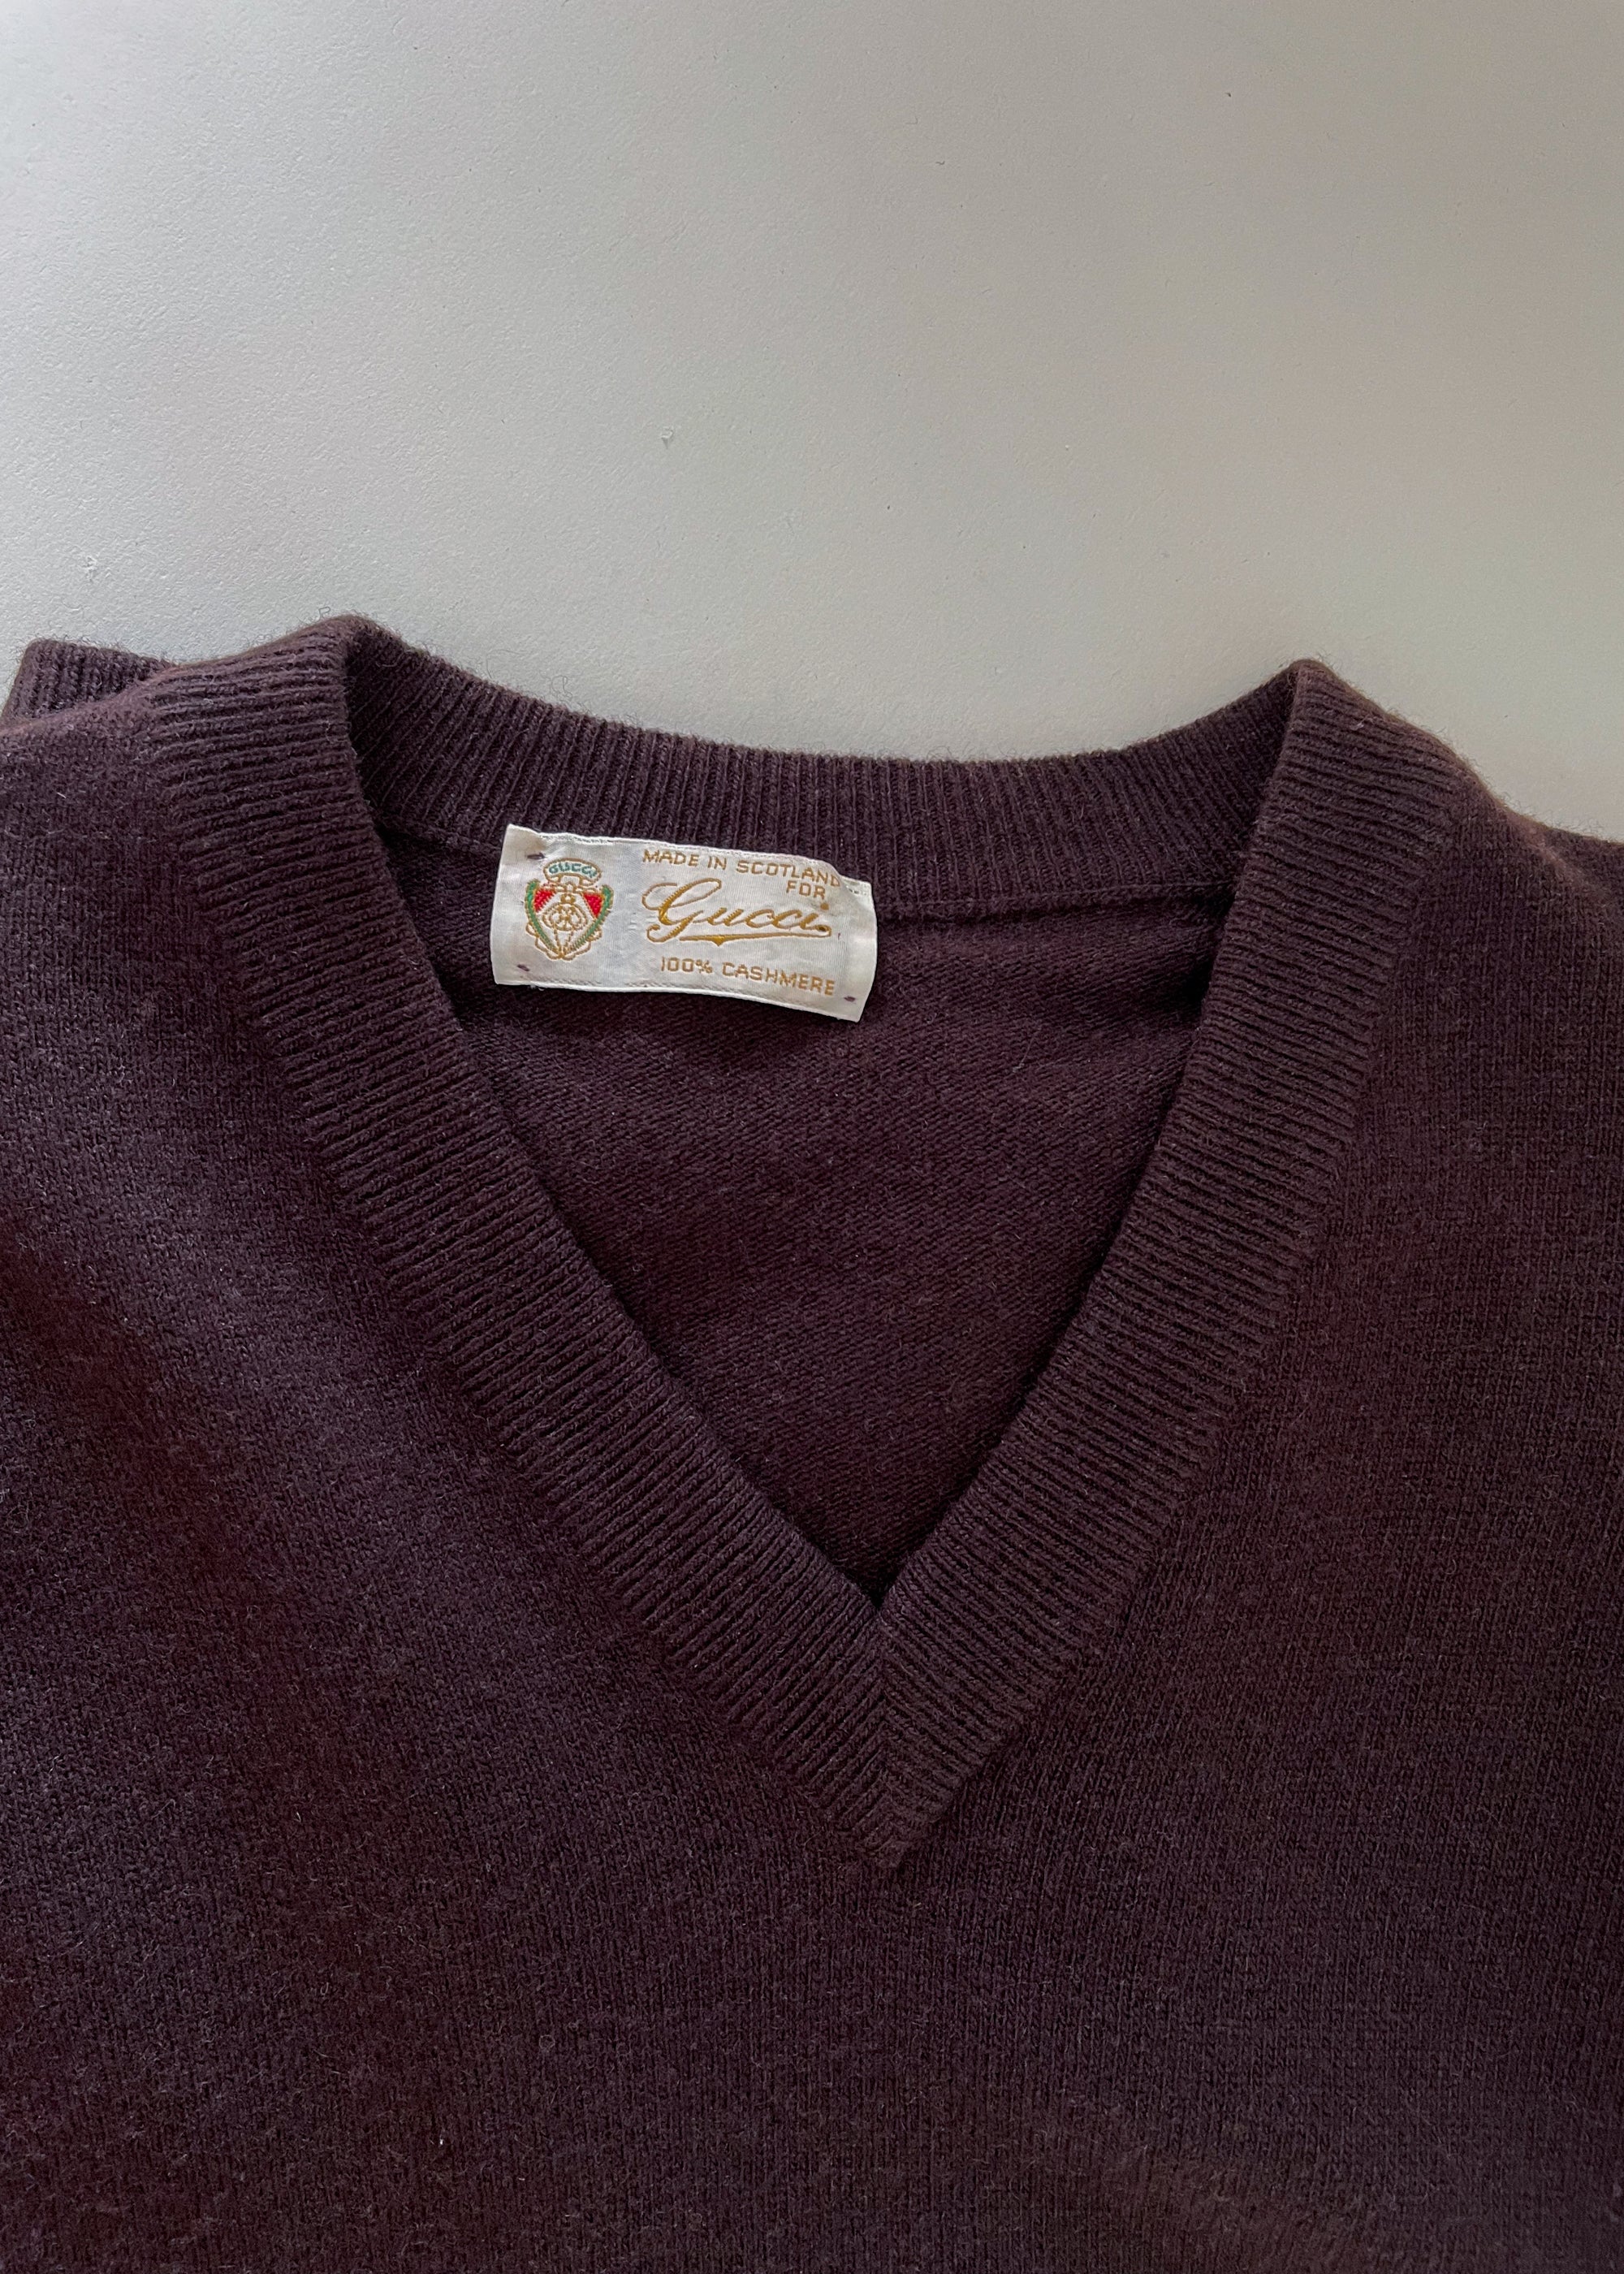 Vintage 1970s Gucci Bulldog Cashmere Sweater - Raleigh Vintage